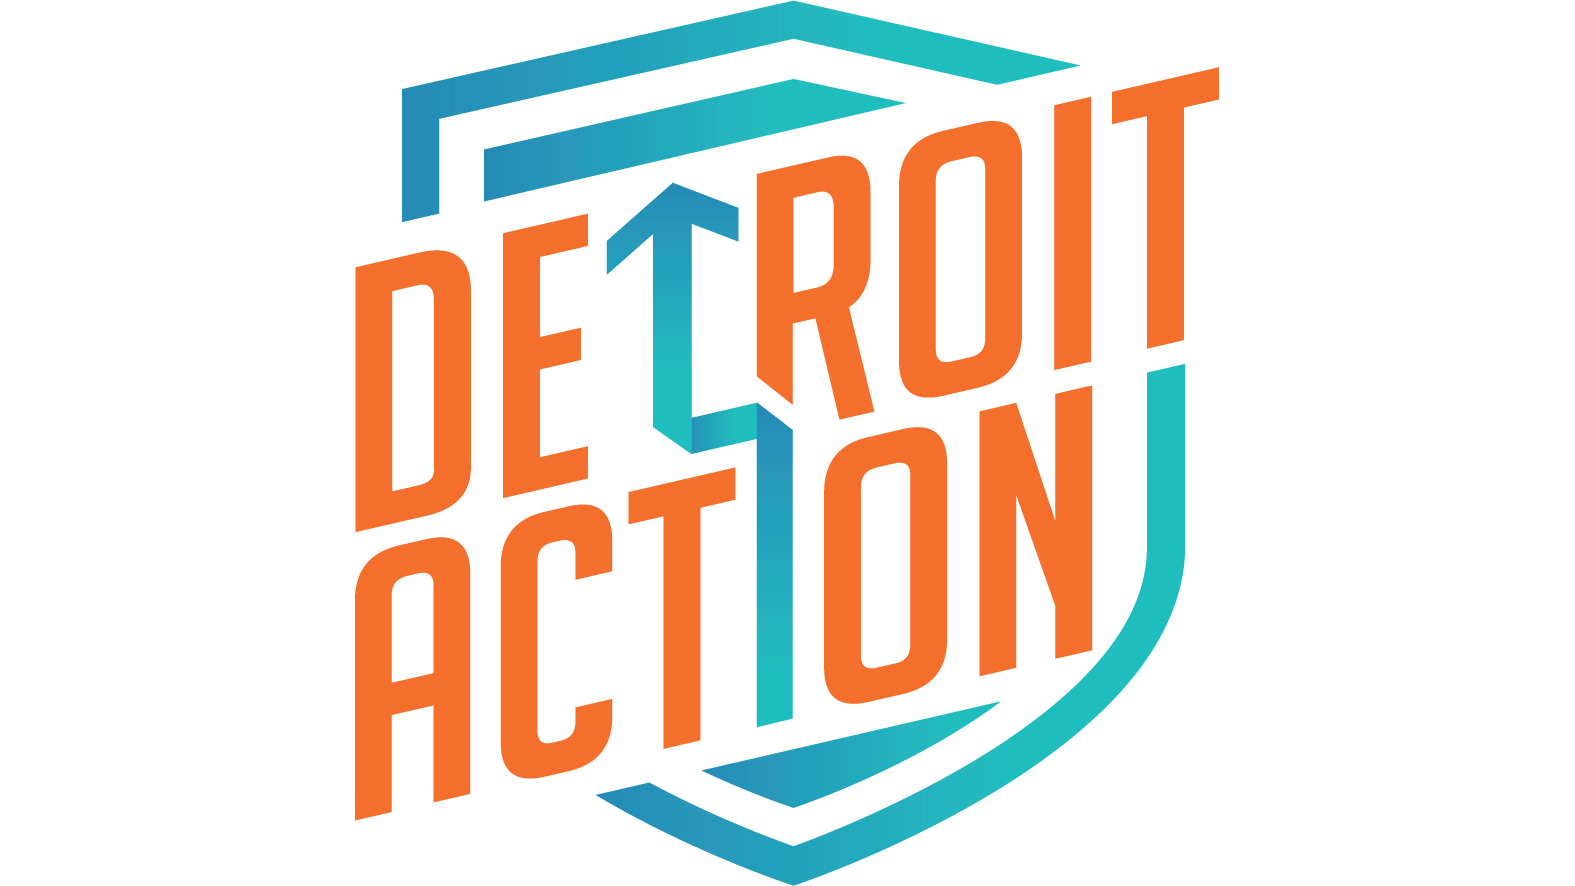 Detroit Action, fiscally sponsored by Tides Advocacy logo